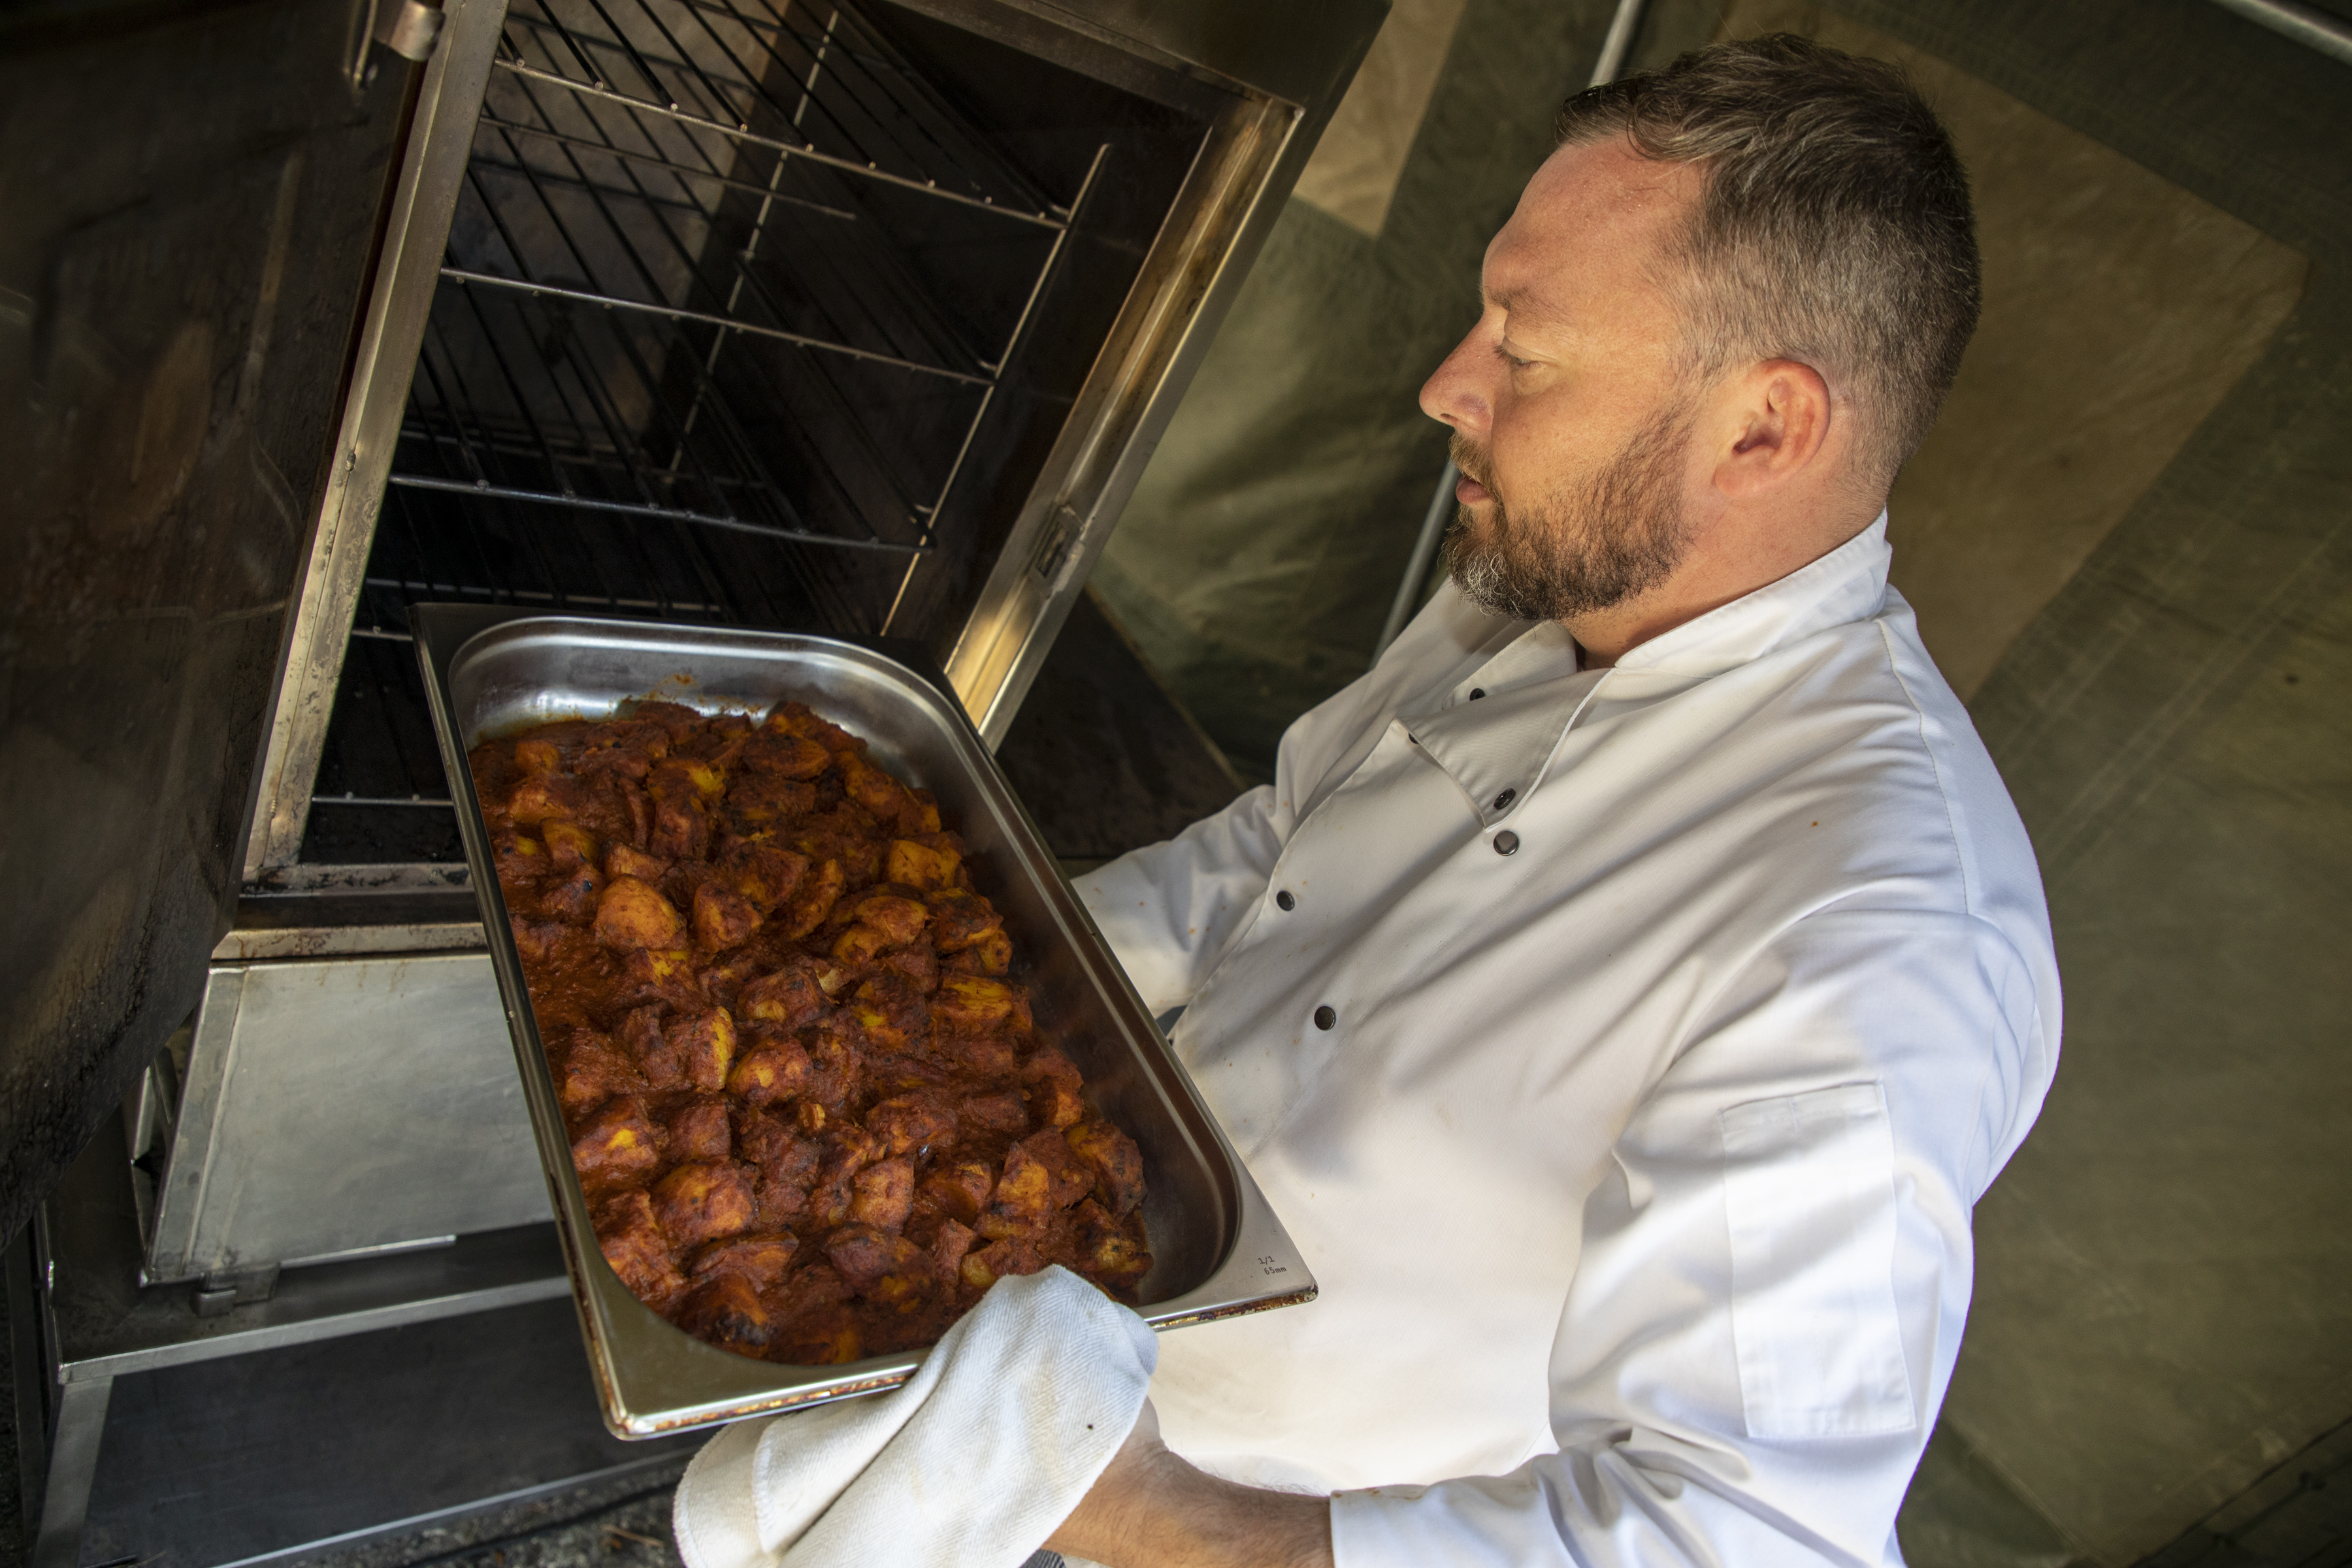 Image shows chef taking cooked potatoes out of industrial oven. 